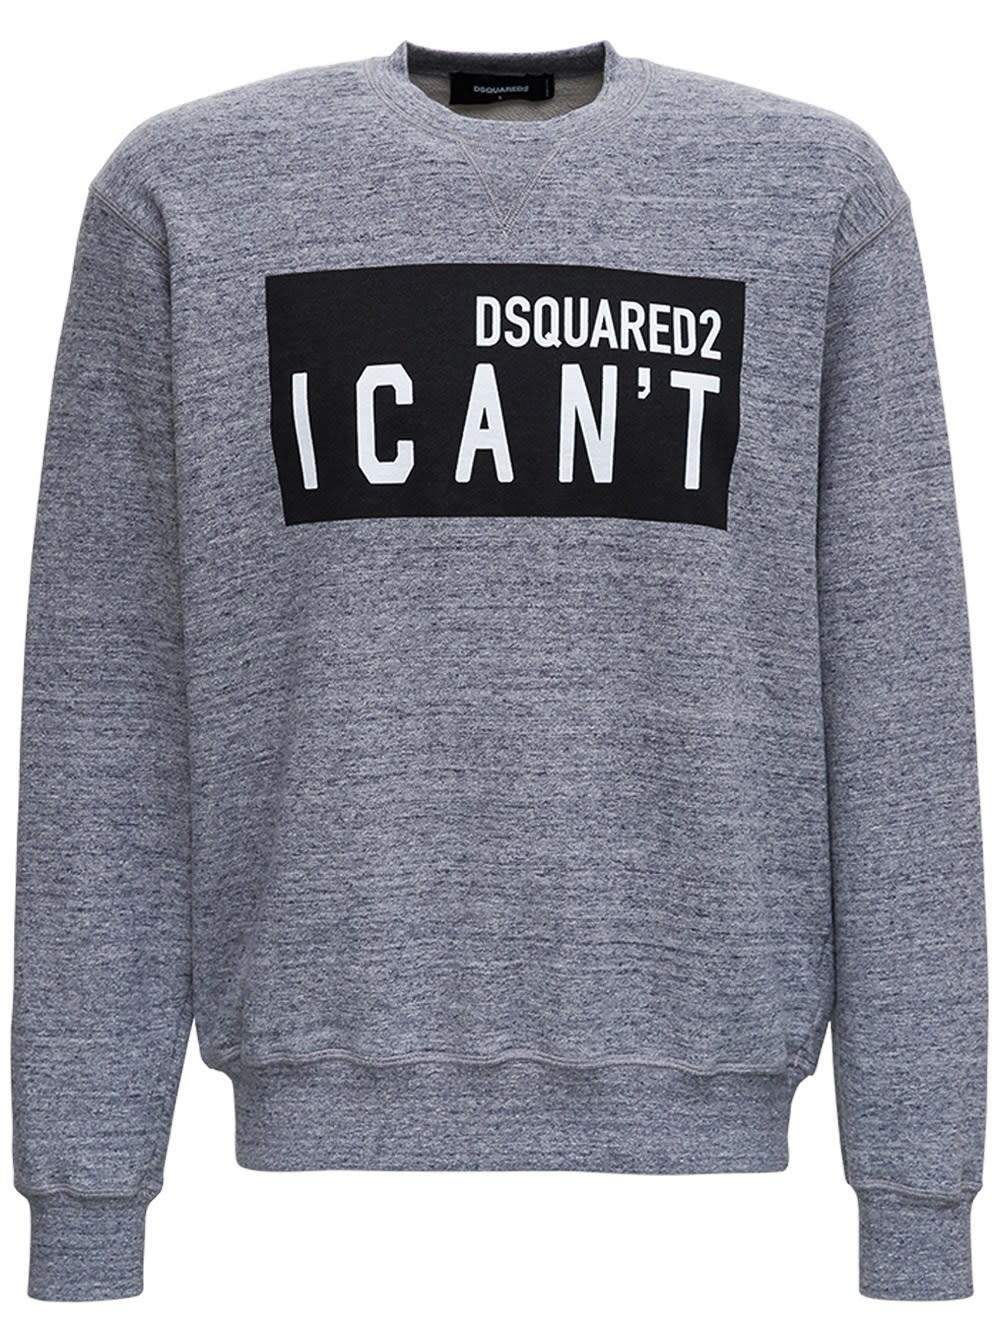 Dsquared2 Cotton Sweatshirt With i Cant Print